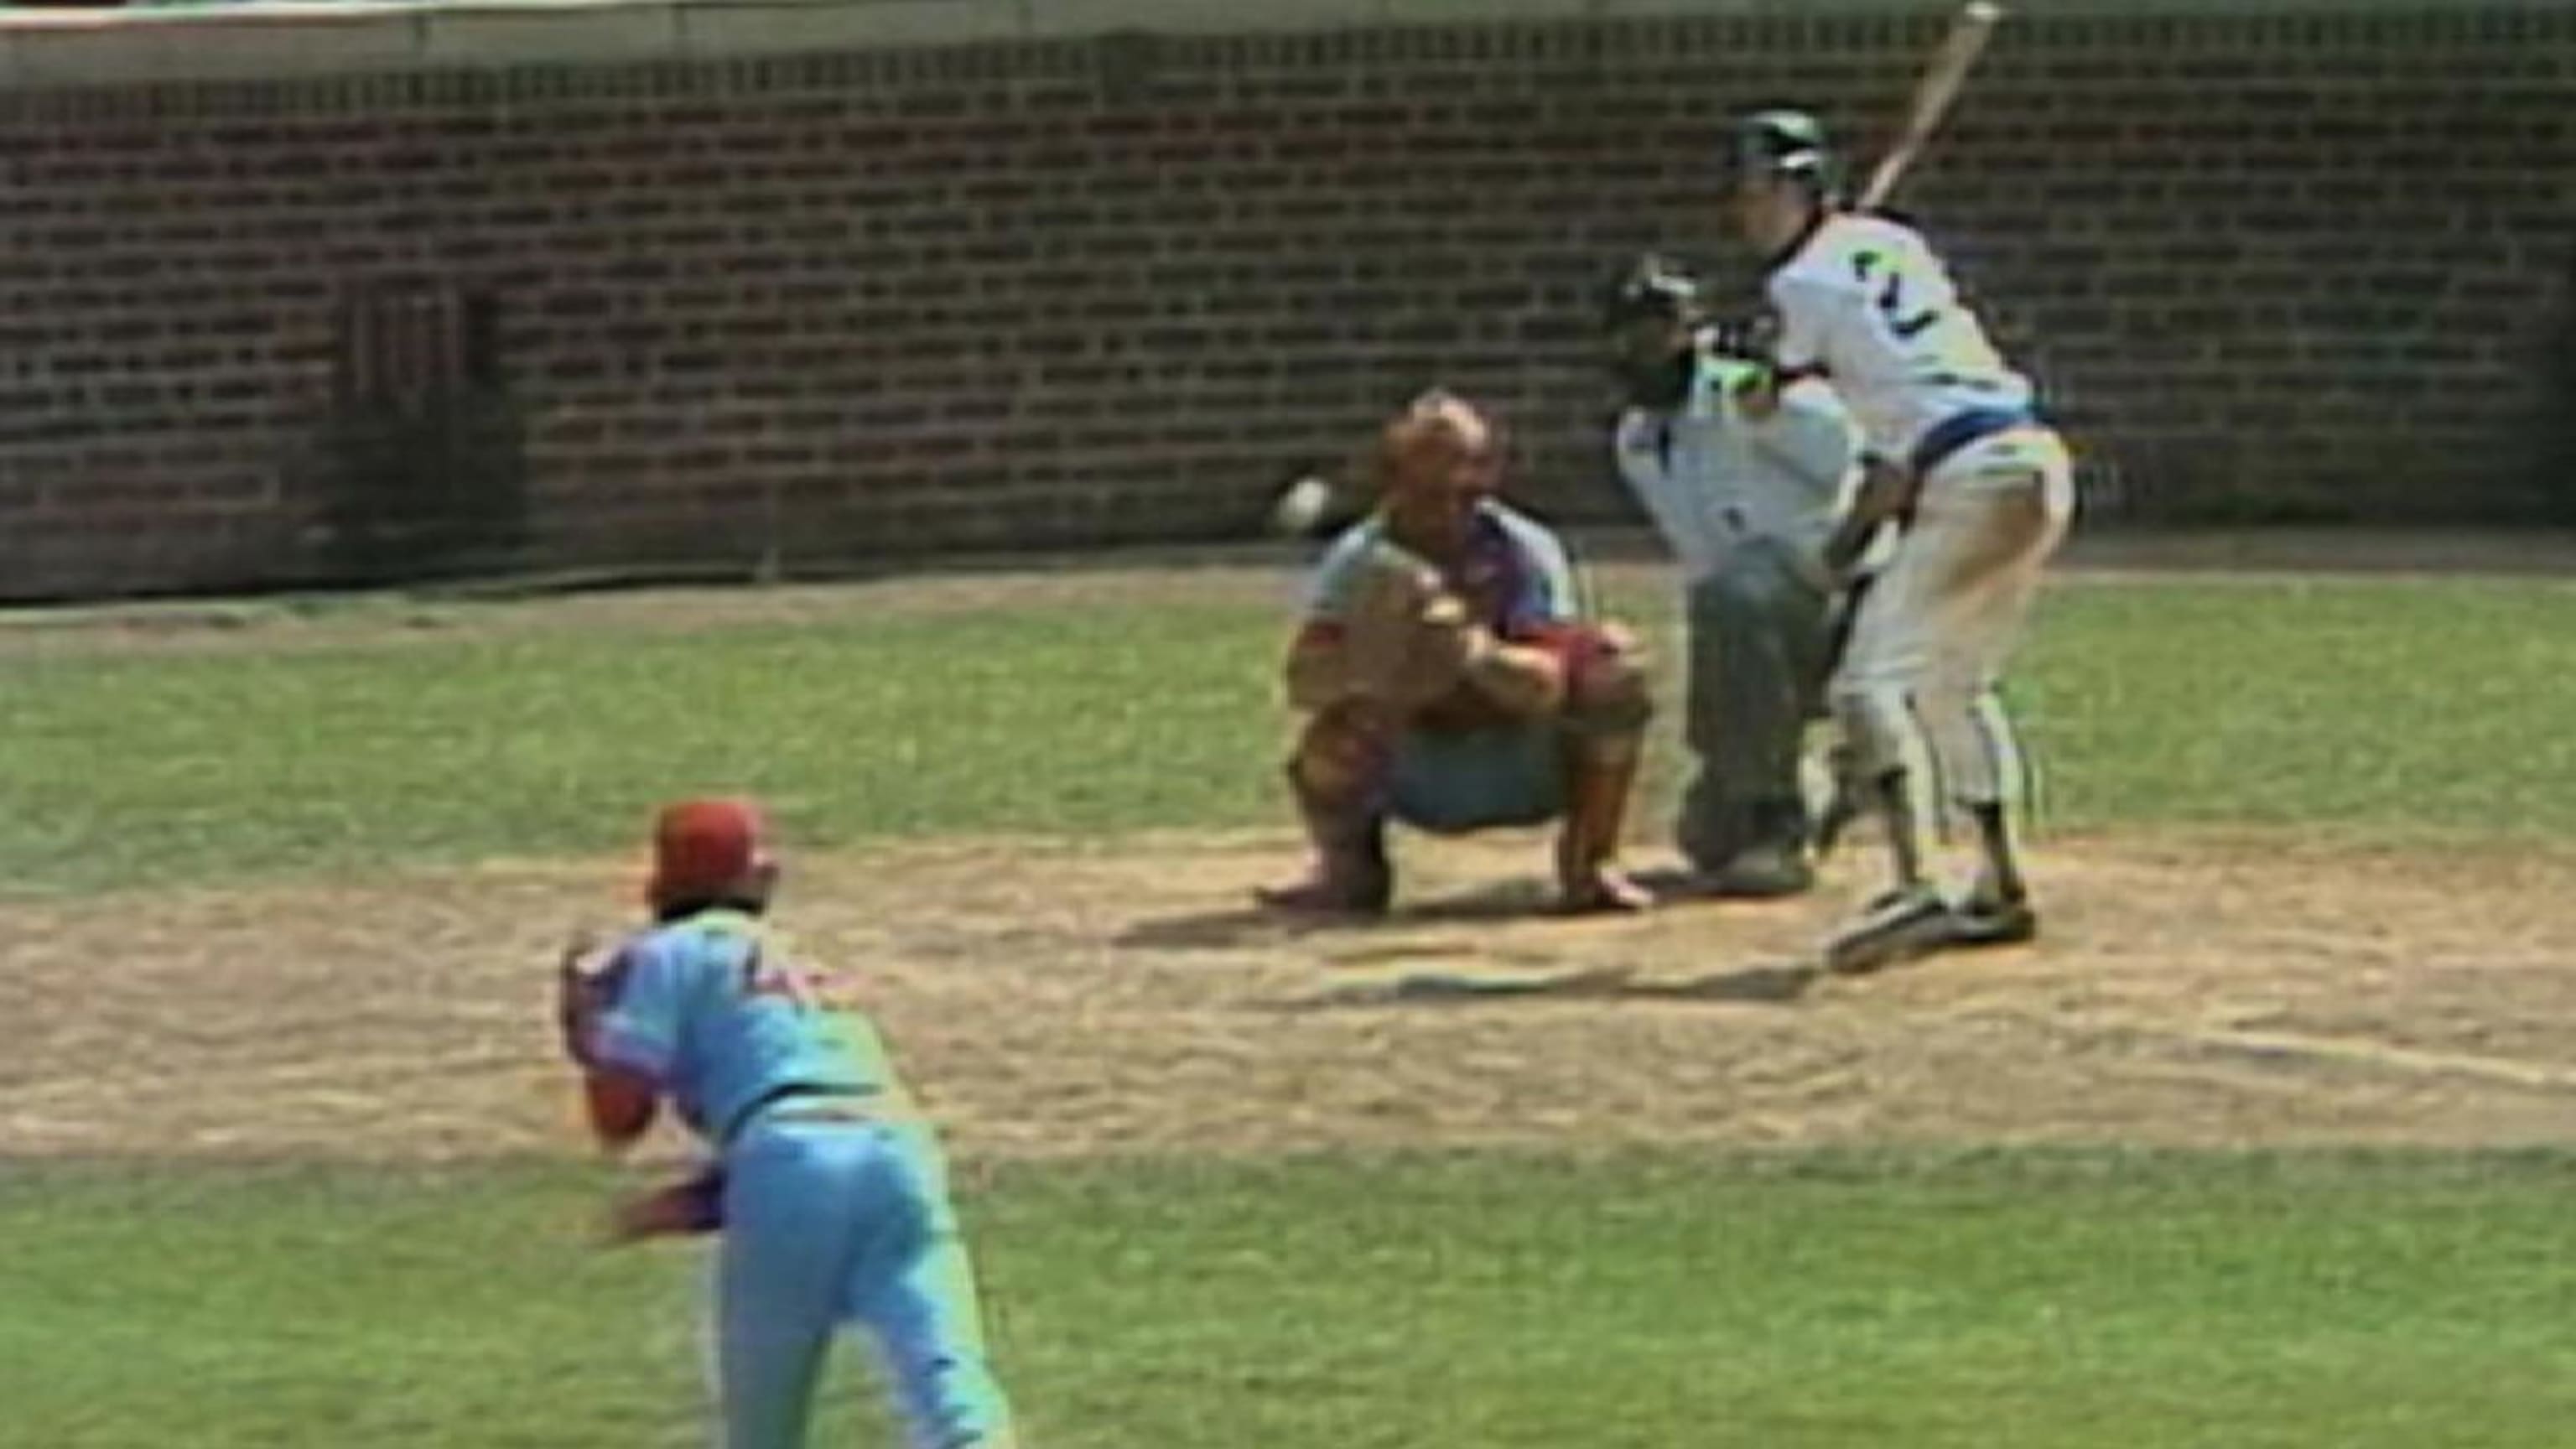 Harry Caray's call of the Sandberg game vs Cards 1984 